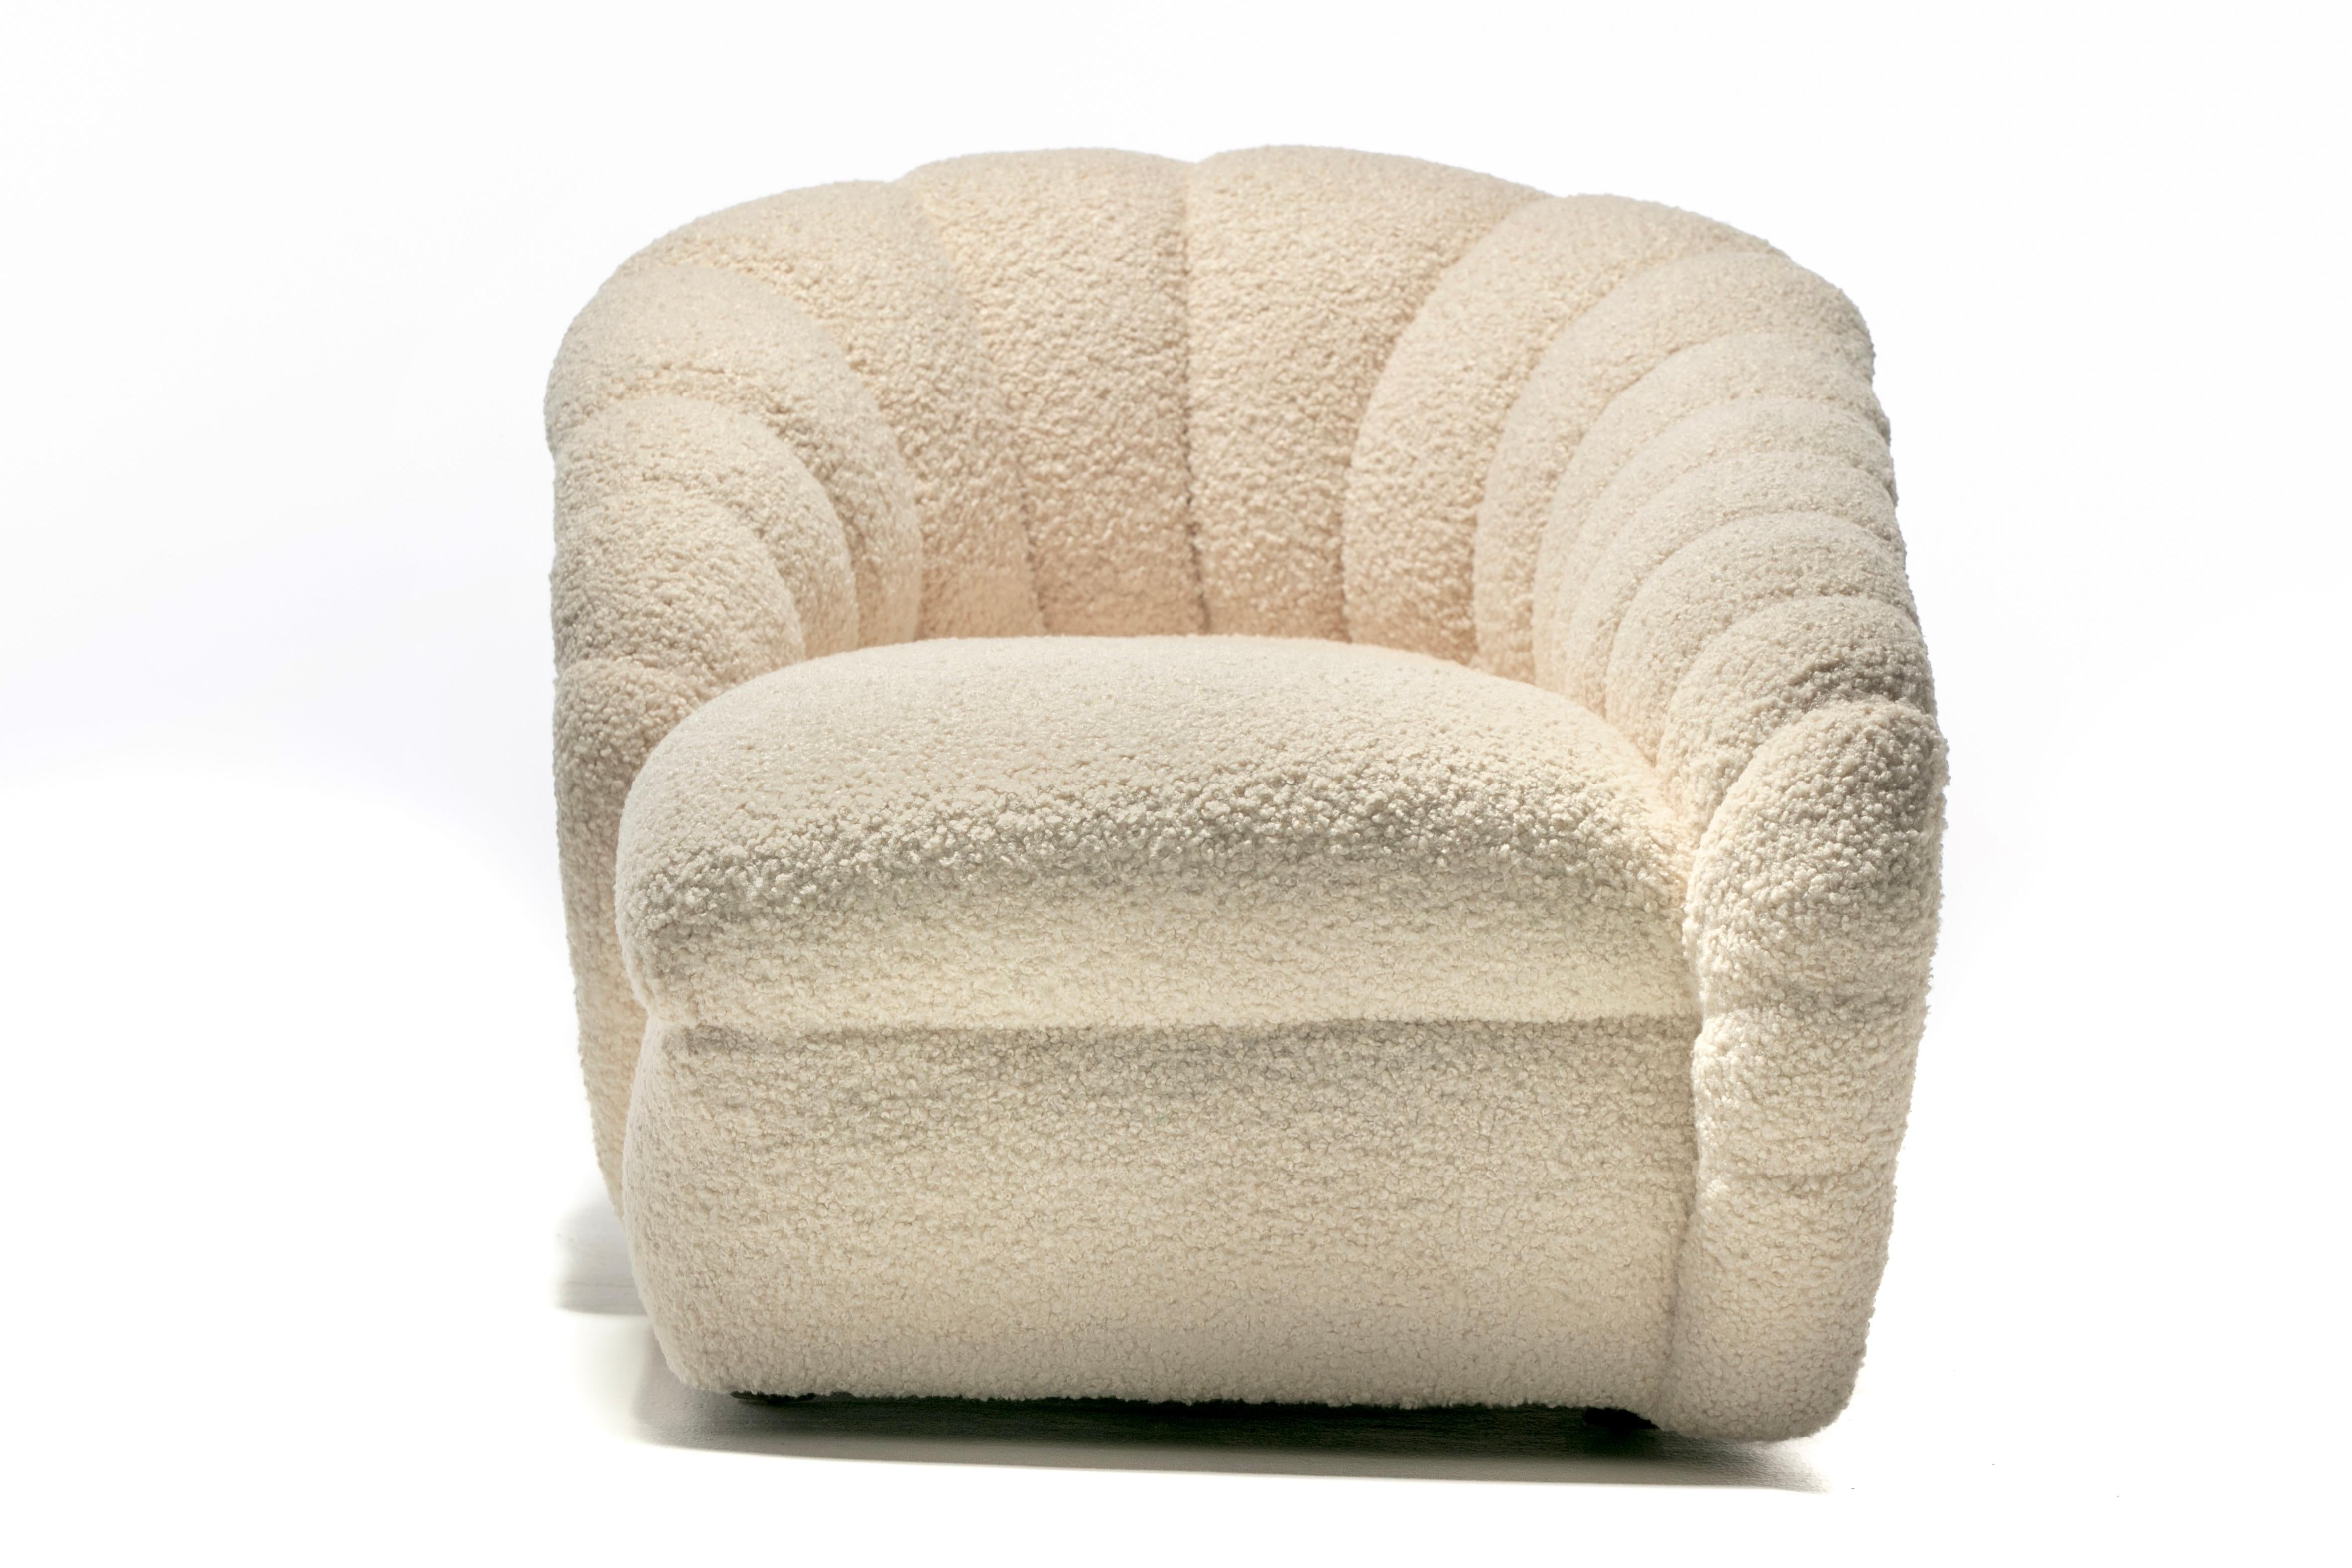 Vladimir Kagan Post Modern Scallop Chaise Lounge in Soft Ivory White Bouclé In Good Condition For Sale In Saint Louis, MO